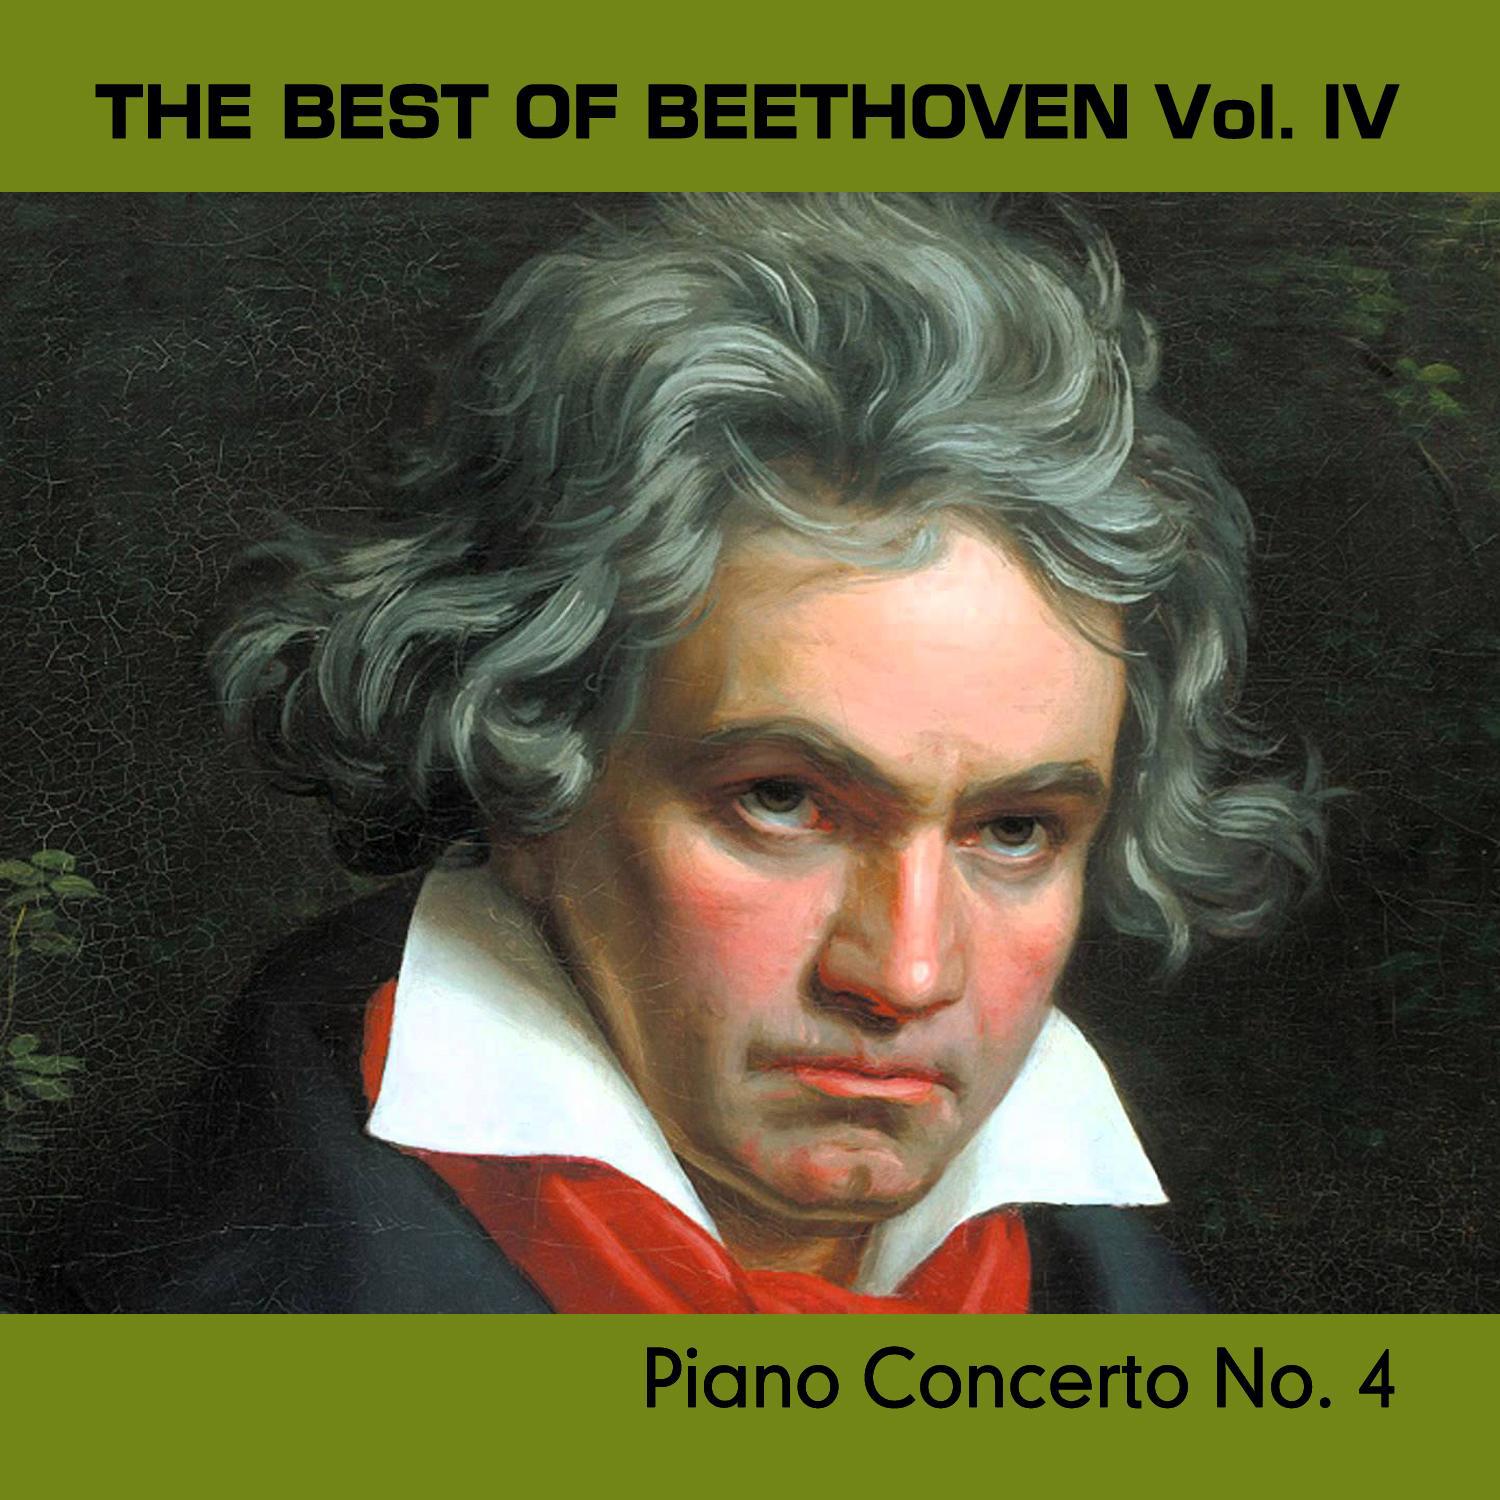 The Best of Beethoven Vol. IV, Piano Concerto No. 4